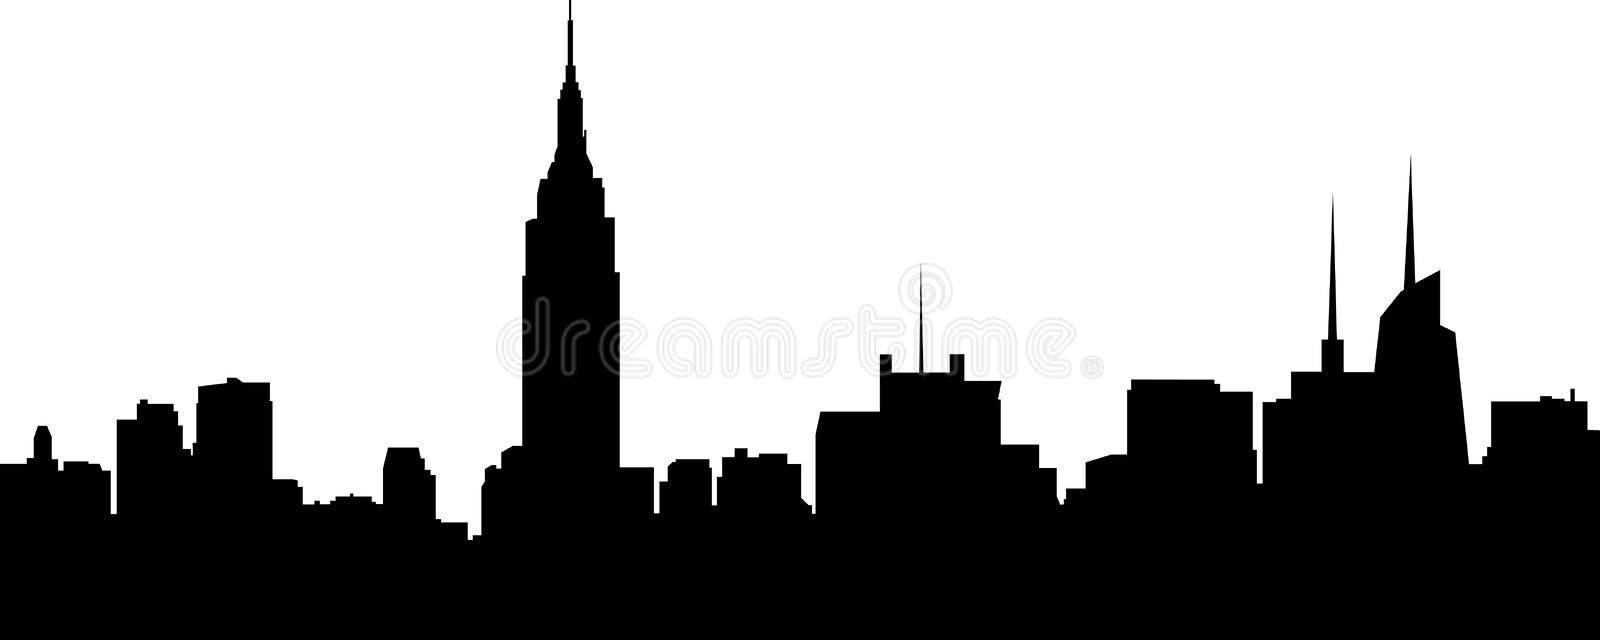 New York City Blue Skyline Silhouette Isolated on White Background ...